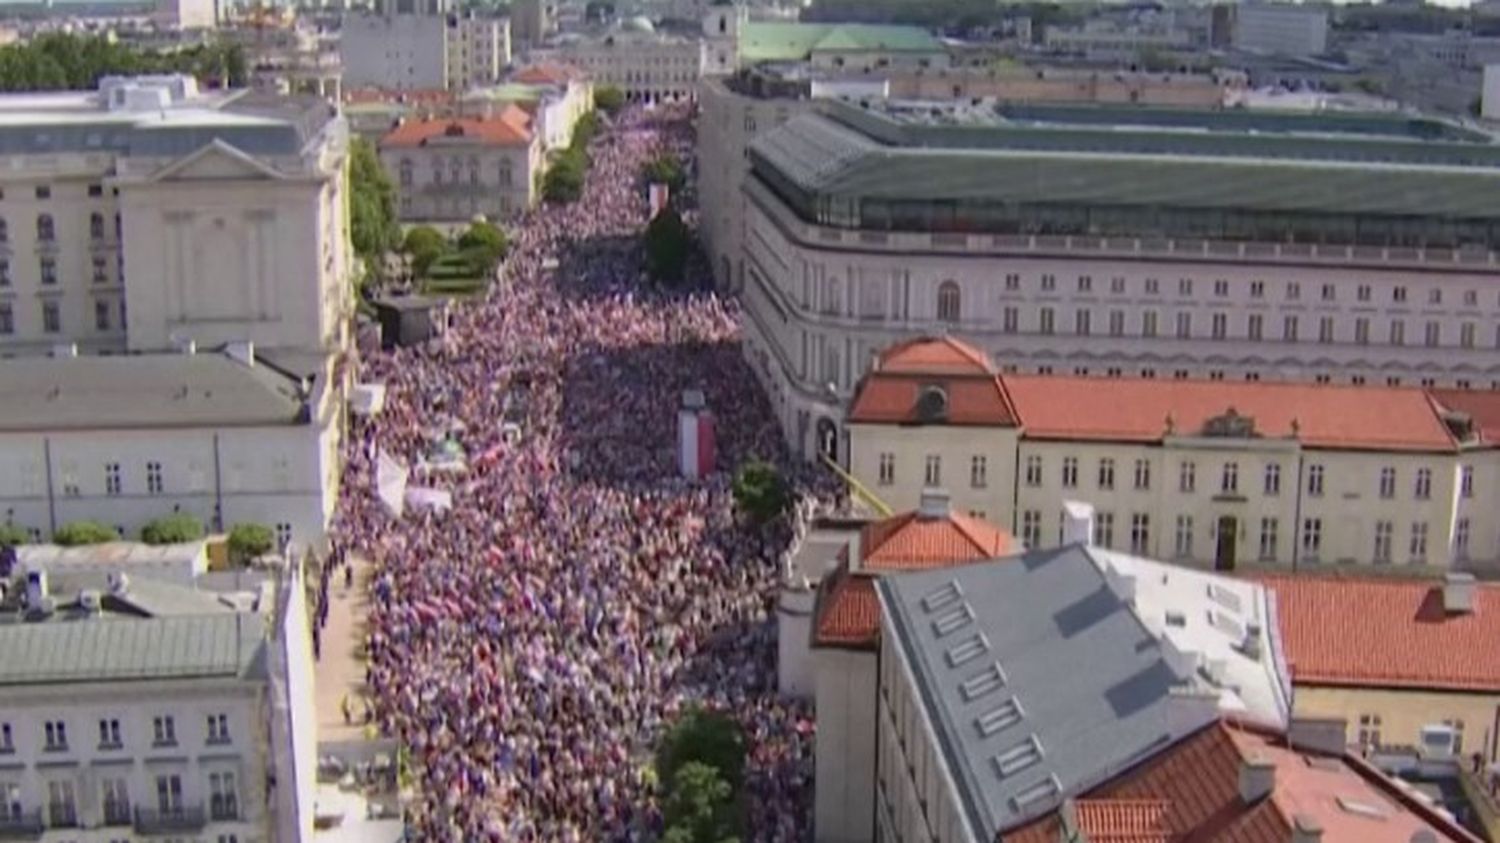 Poland: a demonstration against the government brings together half a million people in Warsaw
